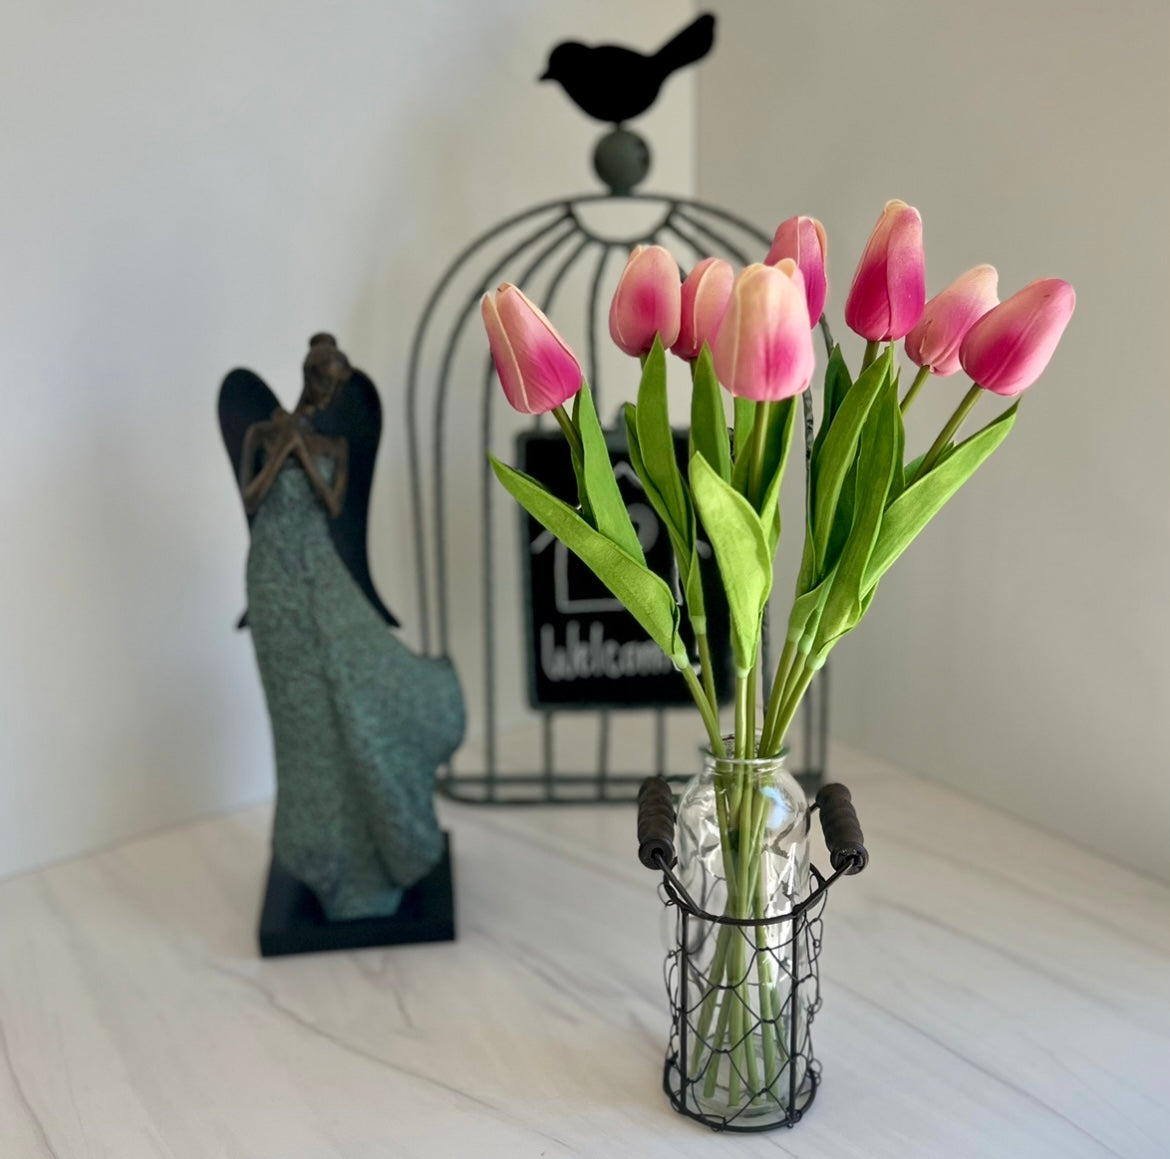 15″ Tulip Stem Bouquet In Vintage Inspired Vase by Just Jill